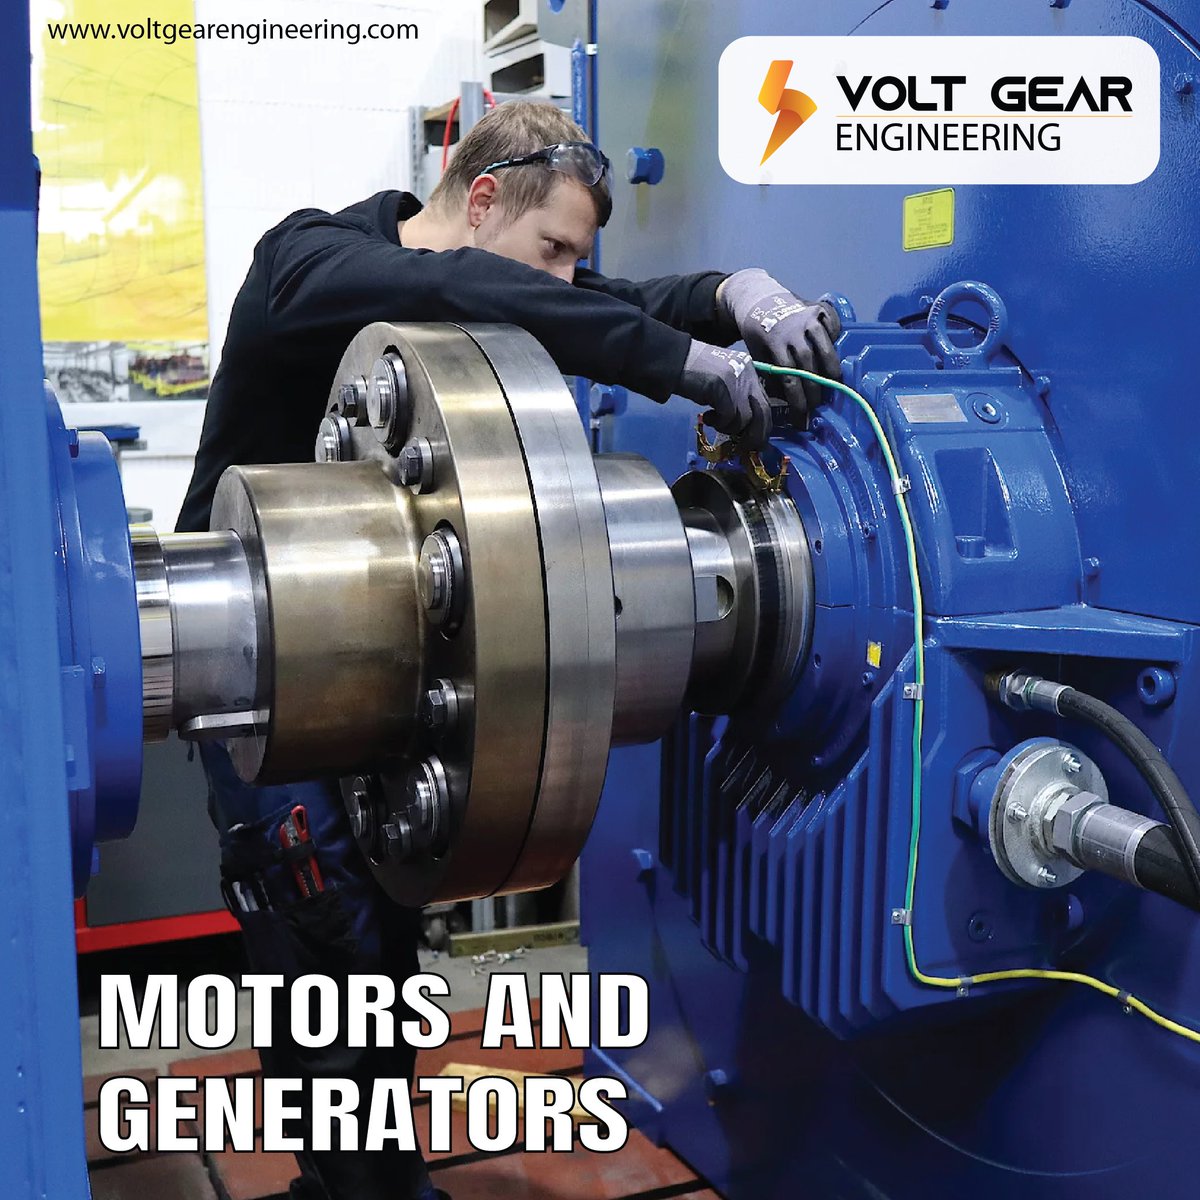 Powering innovation with the dynamic duo of motors and generators. From generating electricity to driving machinery, these essential components keep the world running smoothly. ⚙️🔌
.
.
#motorsandgenerators #voltgearengineering #PoweringInnovation